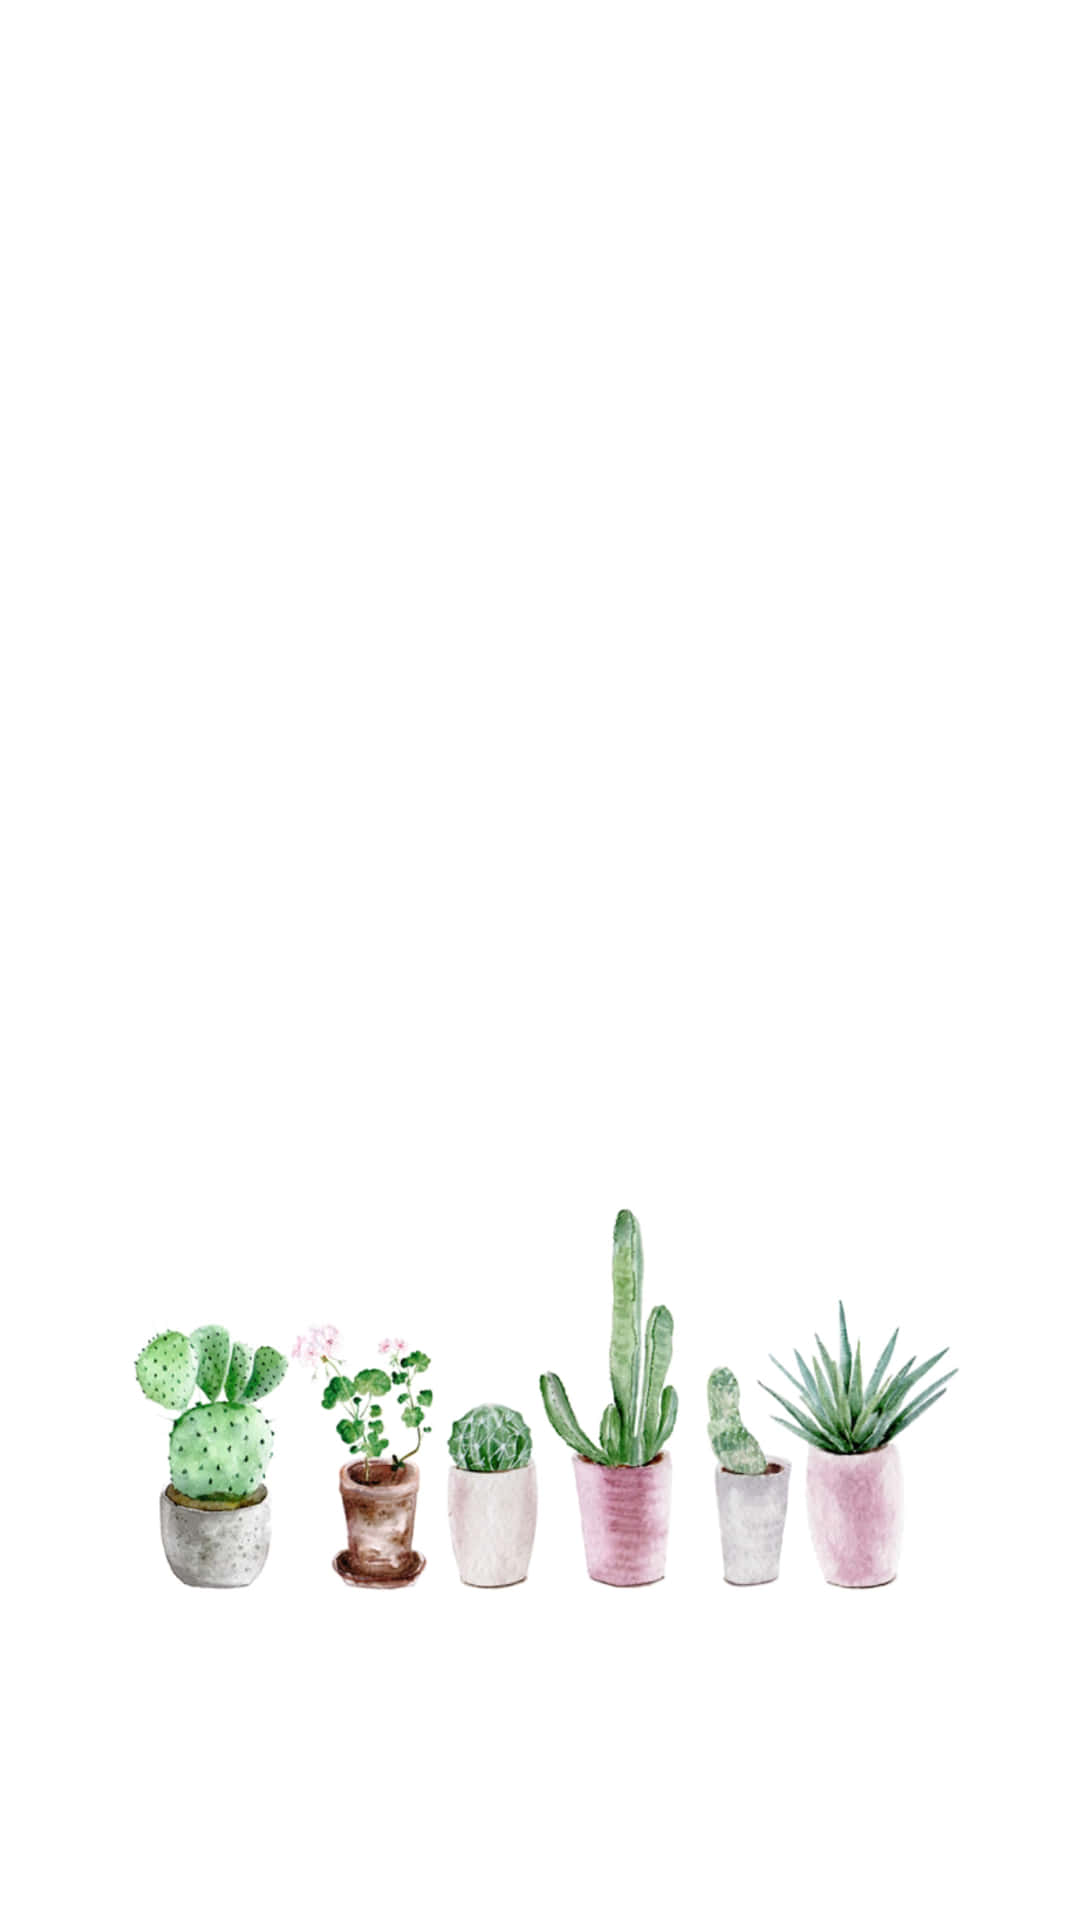 The Perfect Accessory for Your Apple Iphone - Cactus Iphone Wallpaper